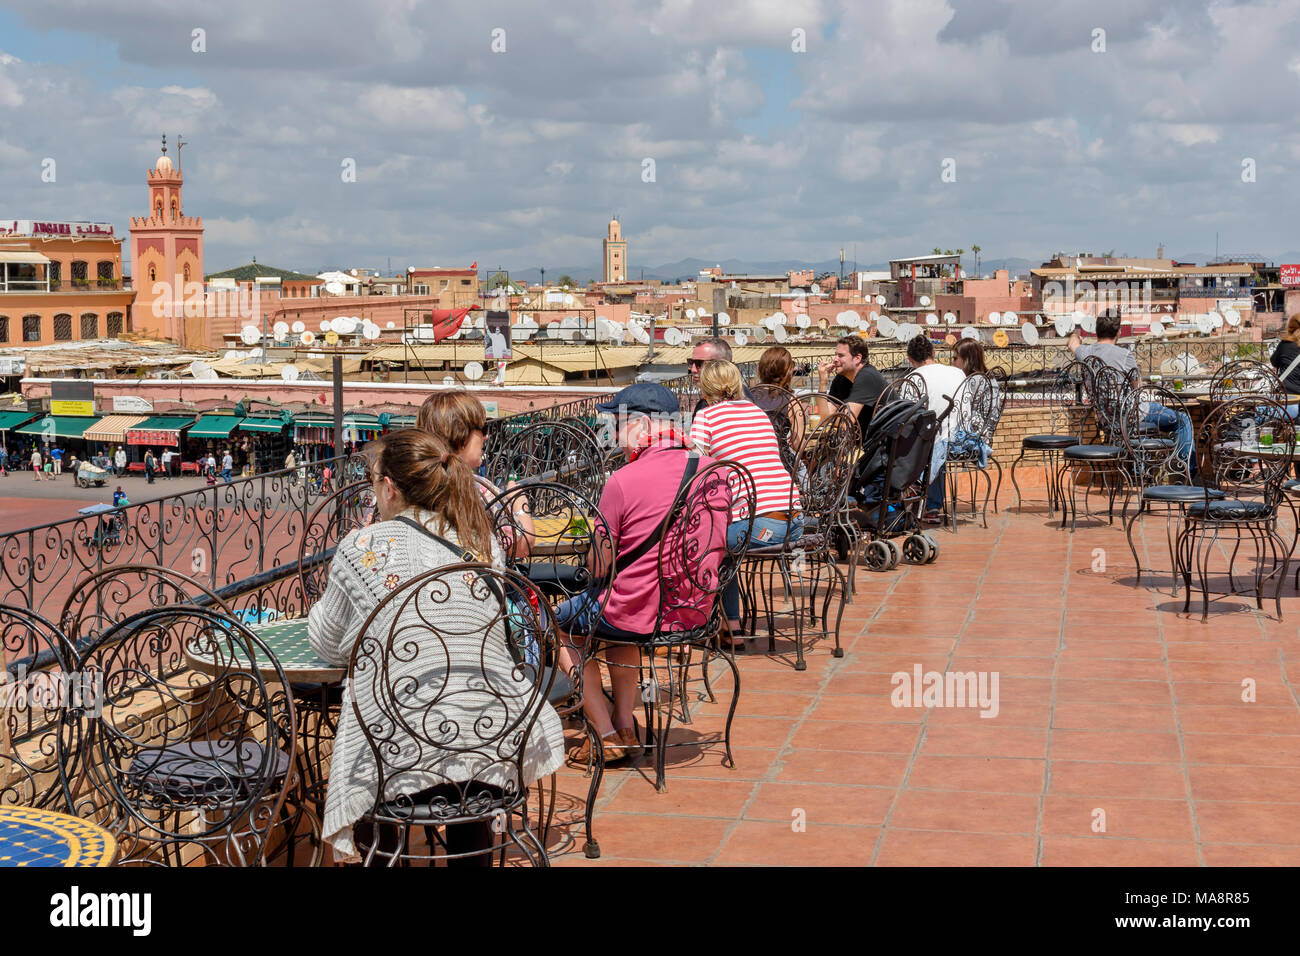 MOROCCO MARRAKECH PLACE JEMAA EL FNA TOURISTS VIEWING PLACE JEMAA EL FNA FROM OPEN AIR RESTAURANT Stock Photo